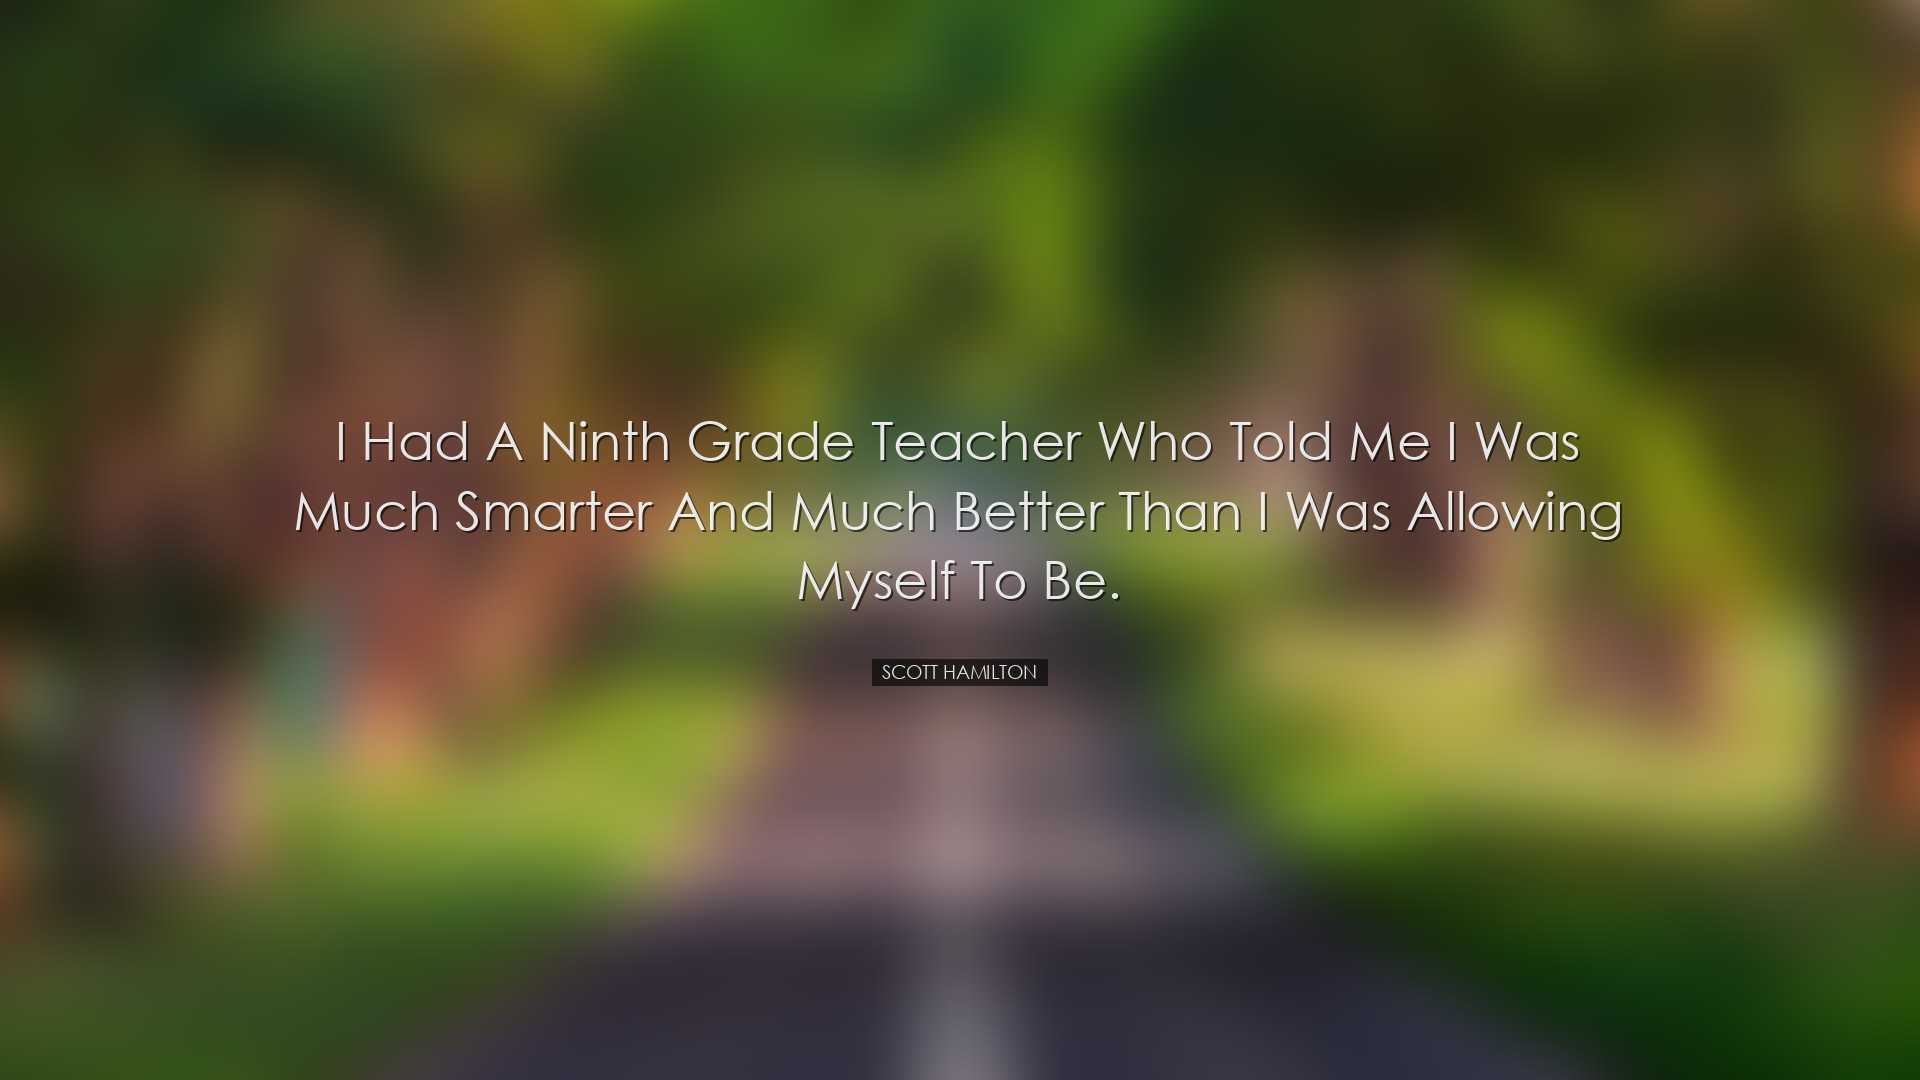 I had a ninth grade teacher who told me I was much smarter and muc